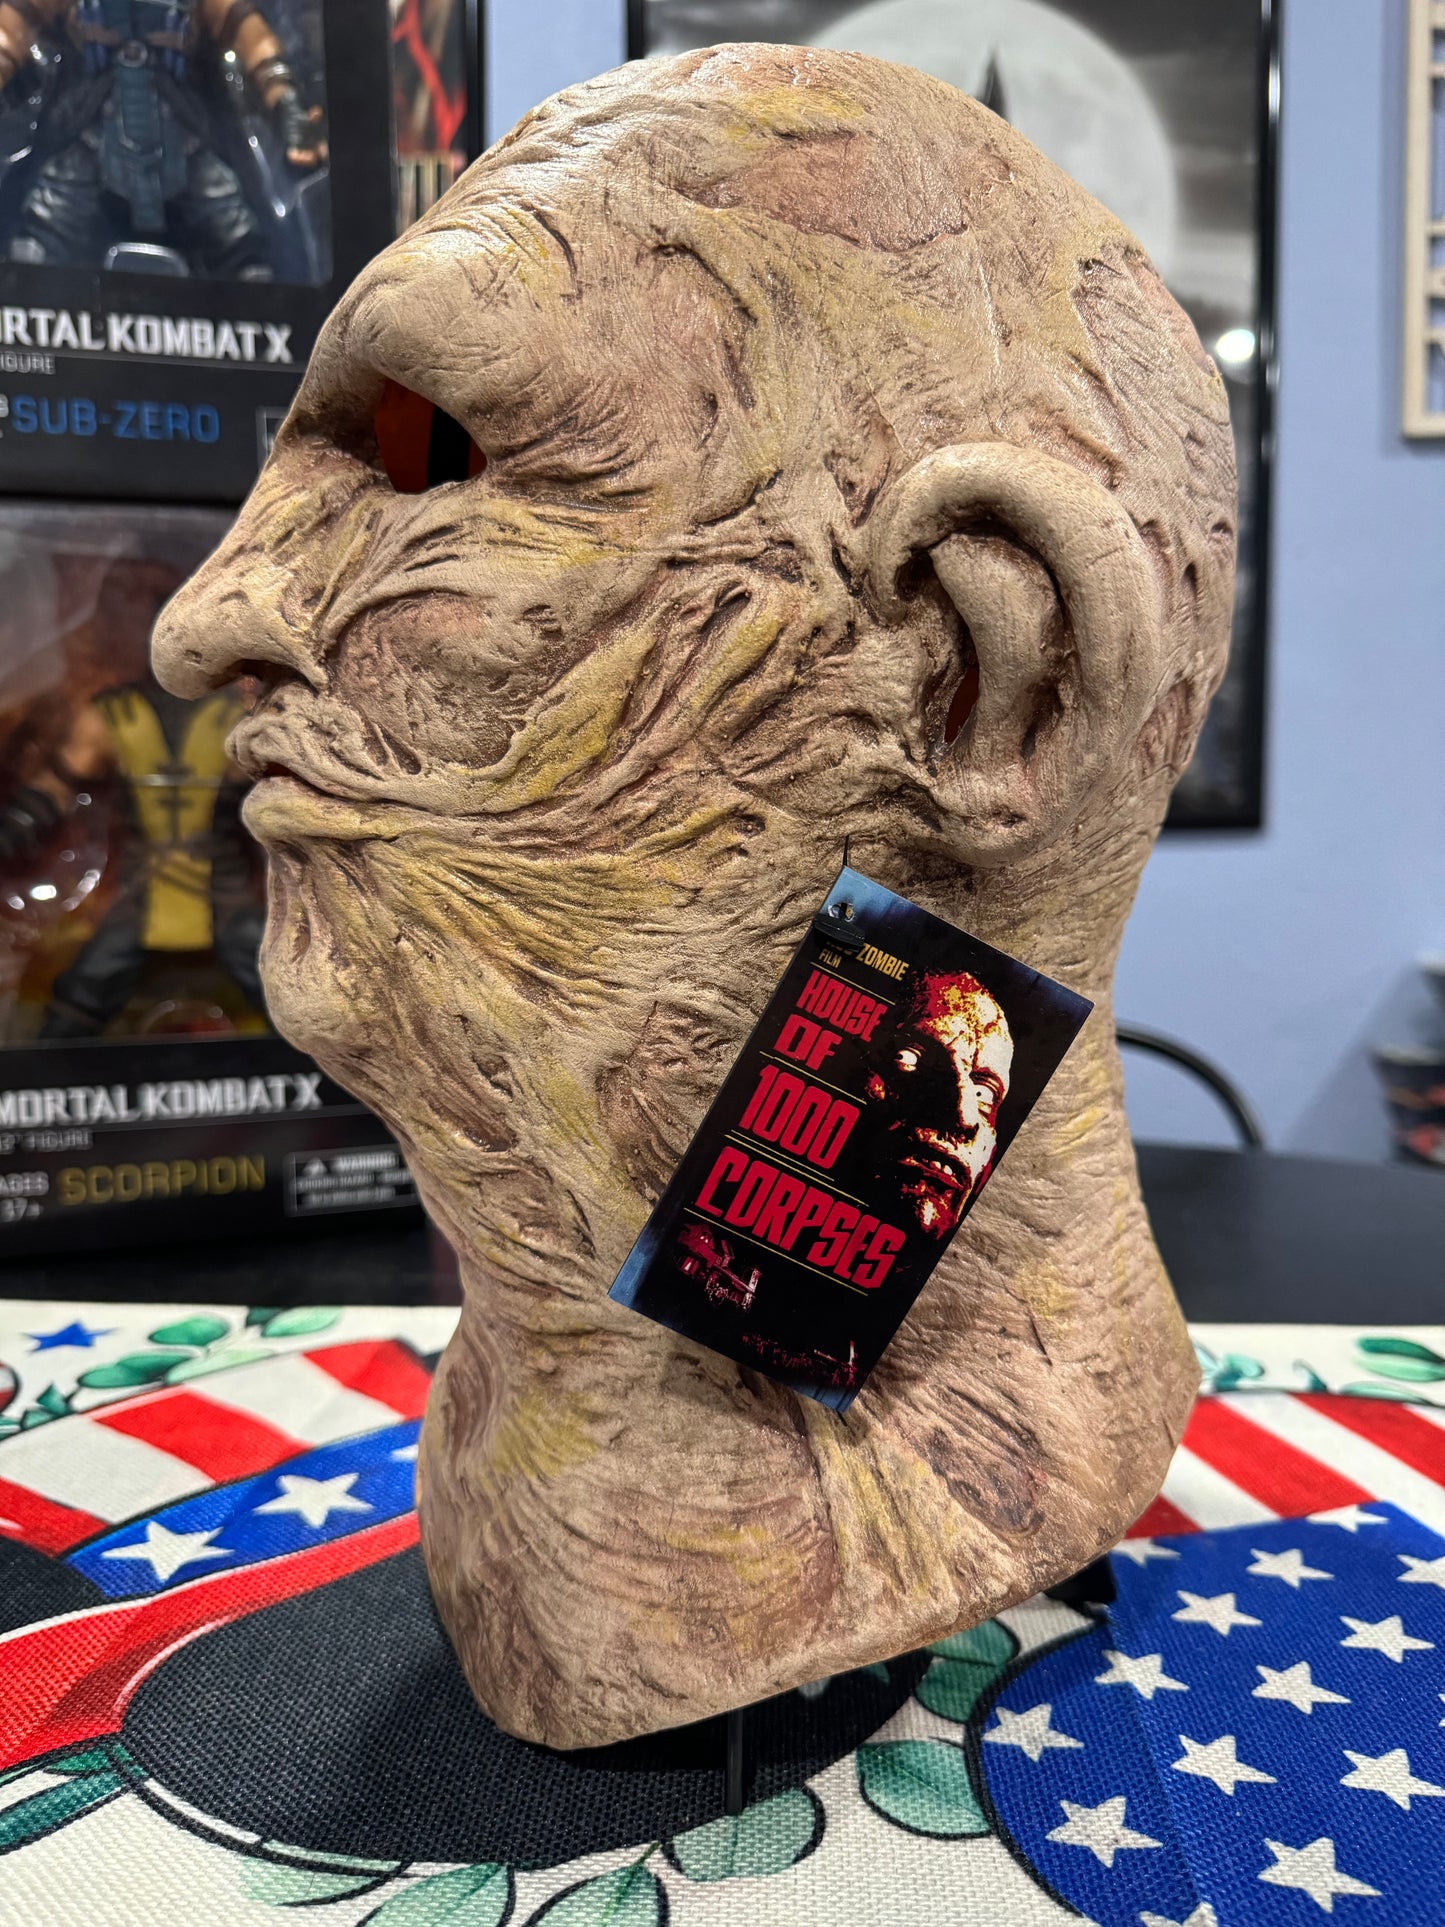 HOUSE OF 1000 CORPSES - TINY FIREFLY MASK